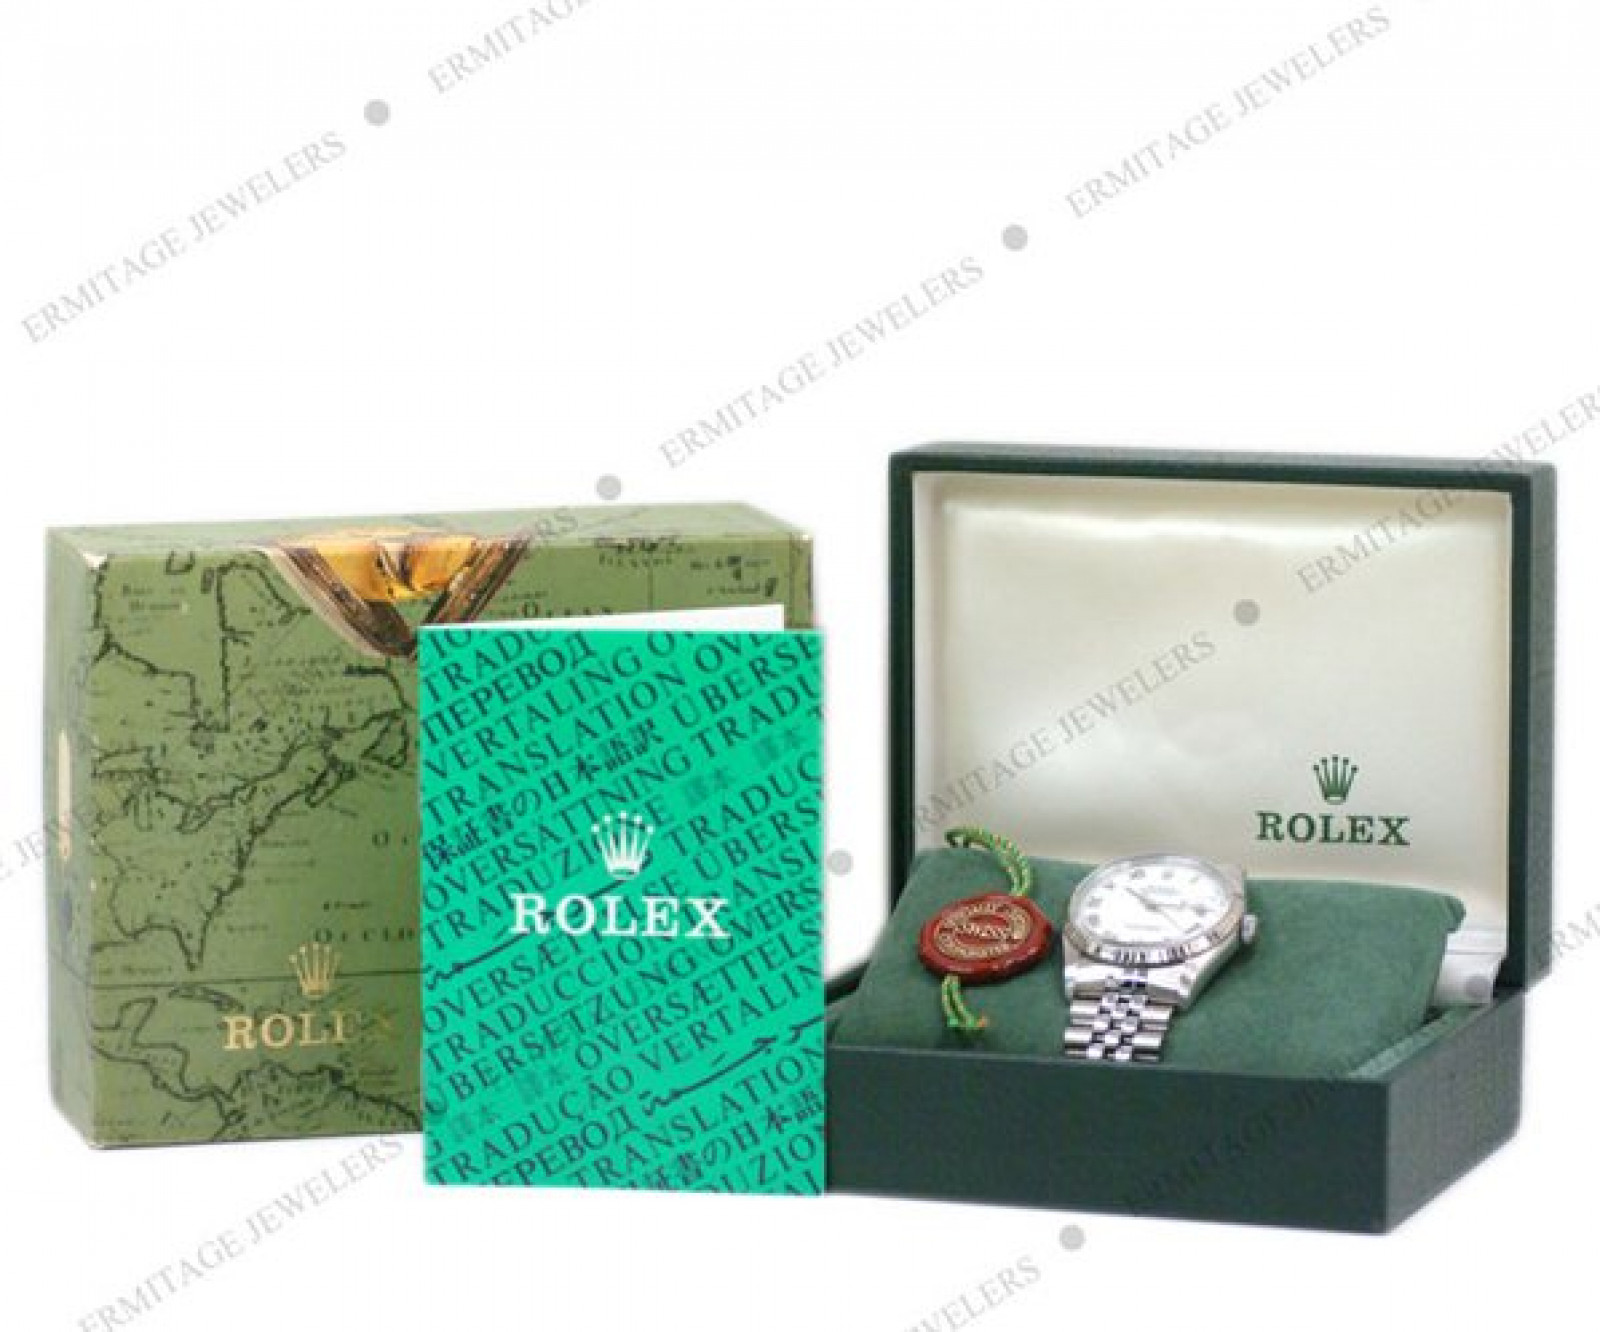 Sell Your Rolex Datejust 16234